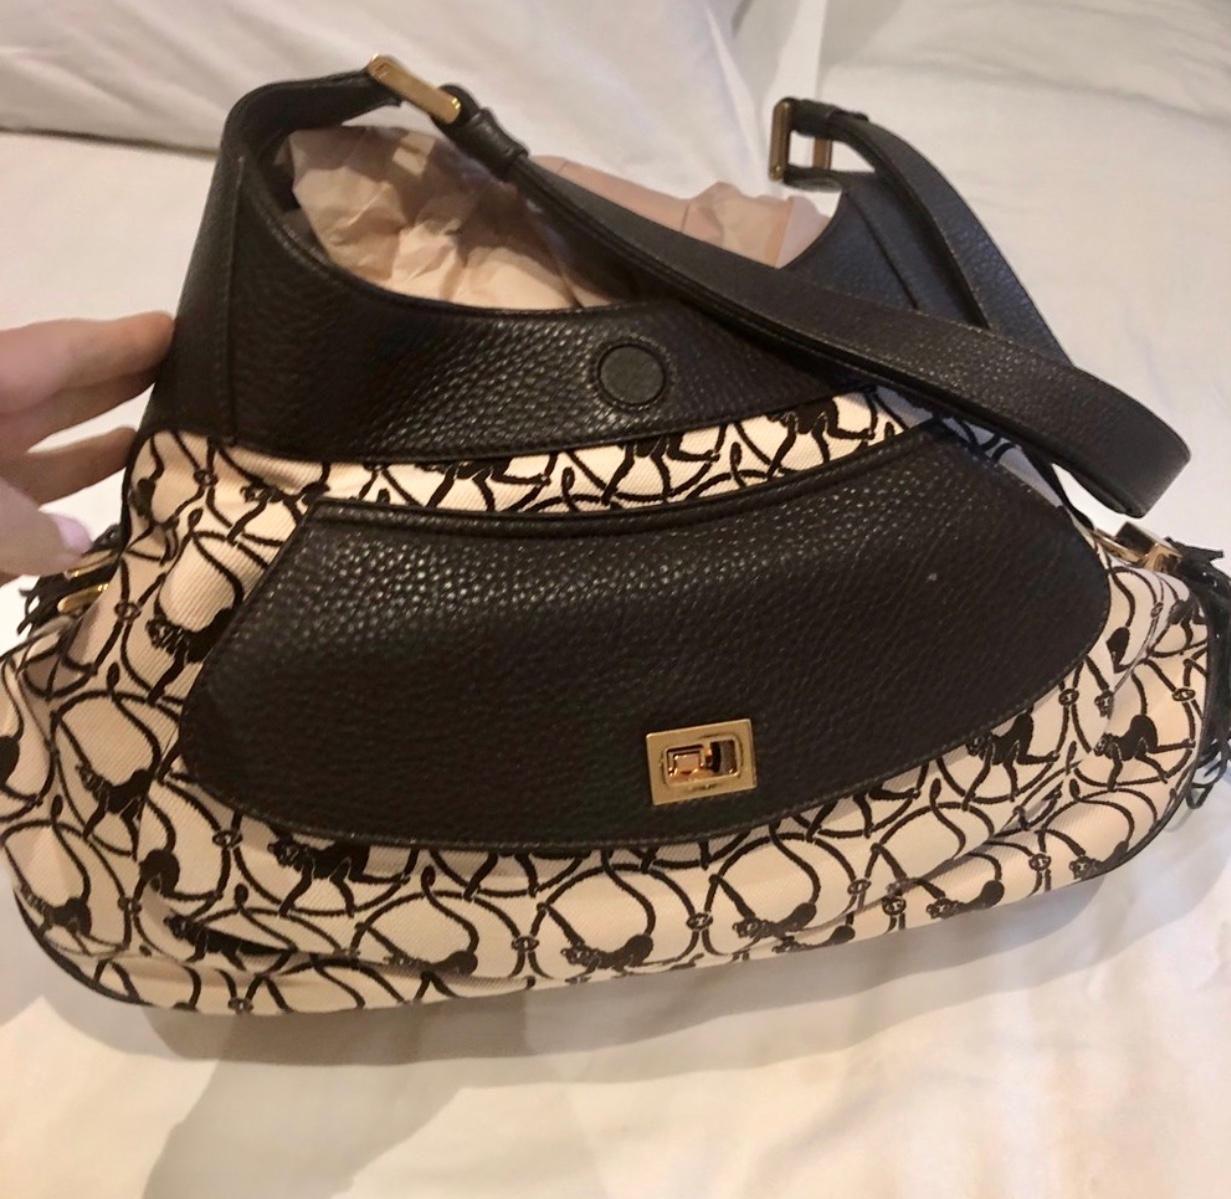 This handbag from Chopard has an earthy yet glamorous feel that is perfect for every day wear. 
Chopard Madrid Brown Cloth & Leather Bag monkey print
Brand new- comes in dust bag (no box)

With dimensions measuring 17 inches long x 4.5 inches wide x